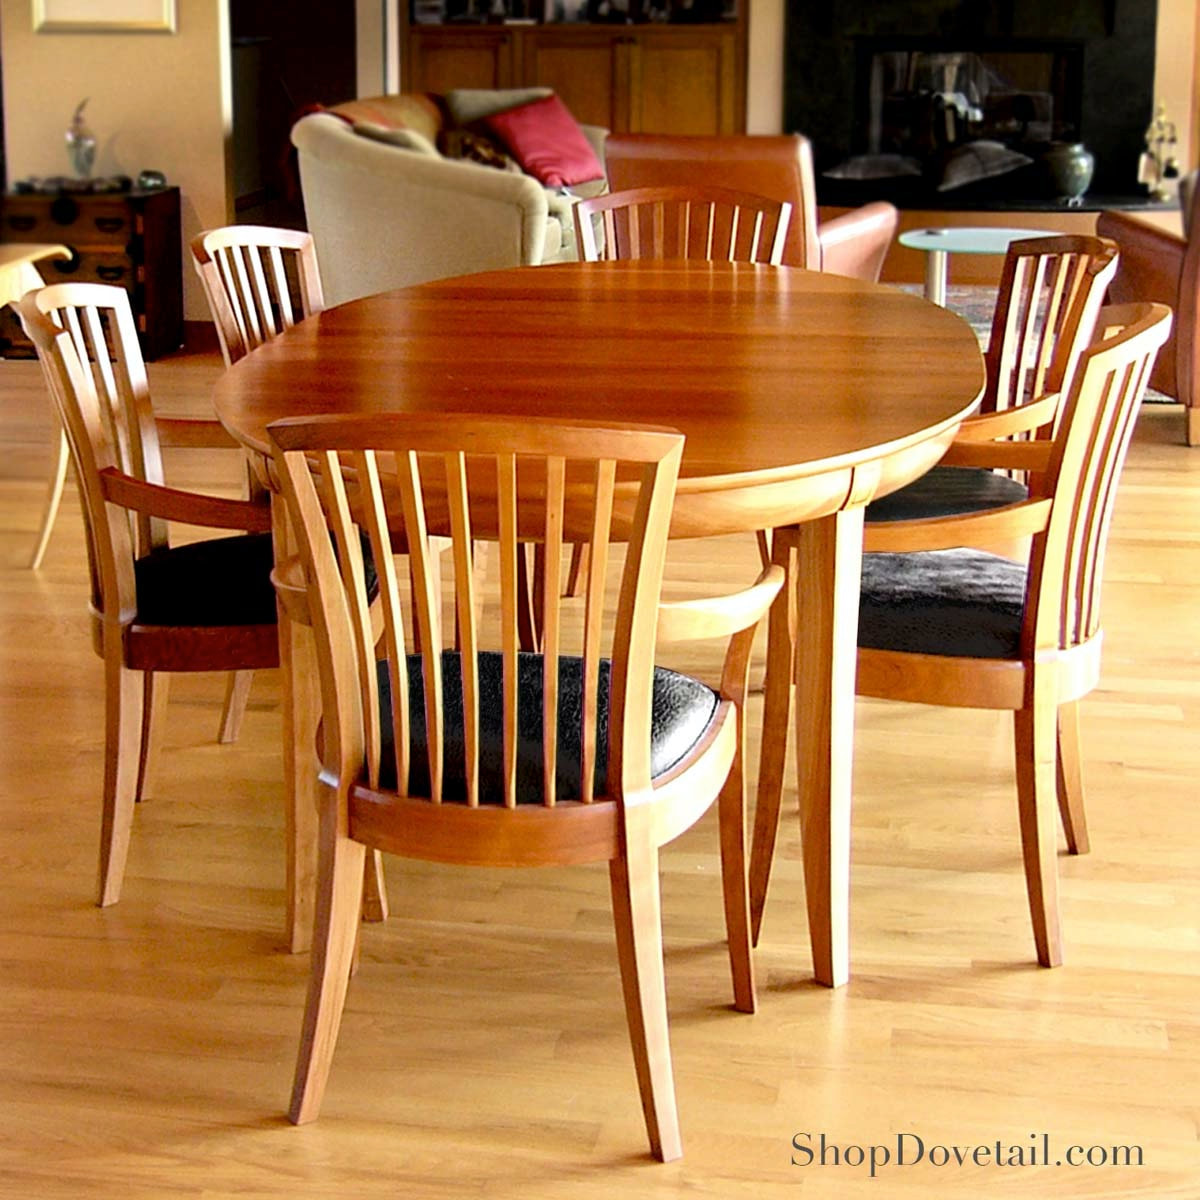 Cherry Oval Dining Table And Chairs